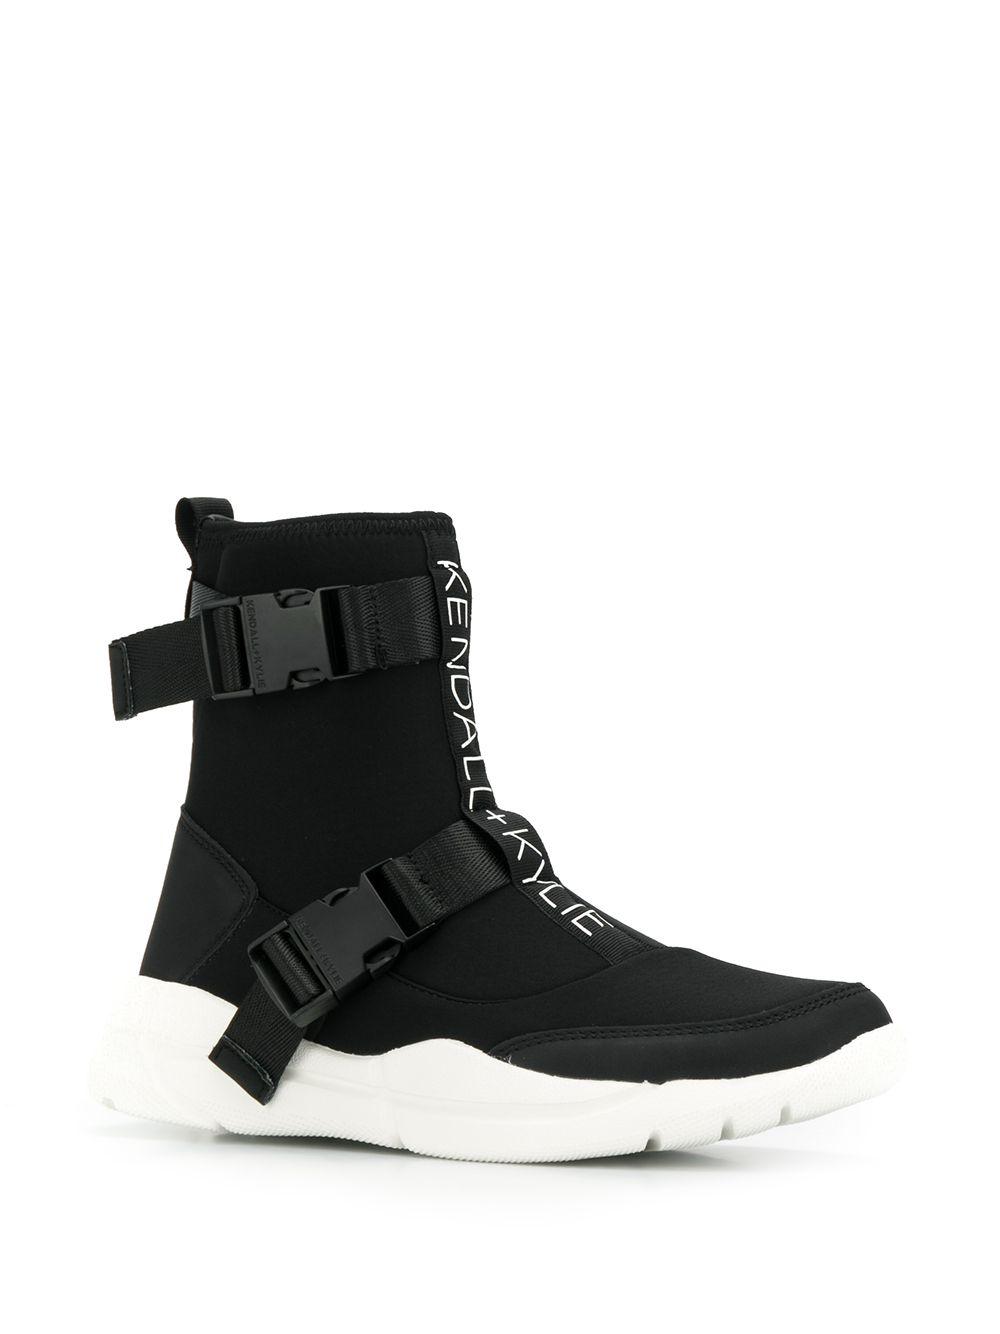 Kendall + Kylie Rubber Nemo Boots in Black - Lyst